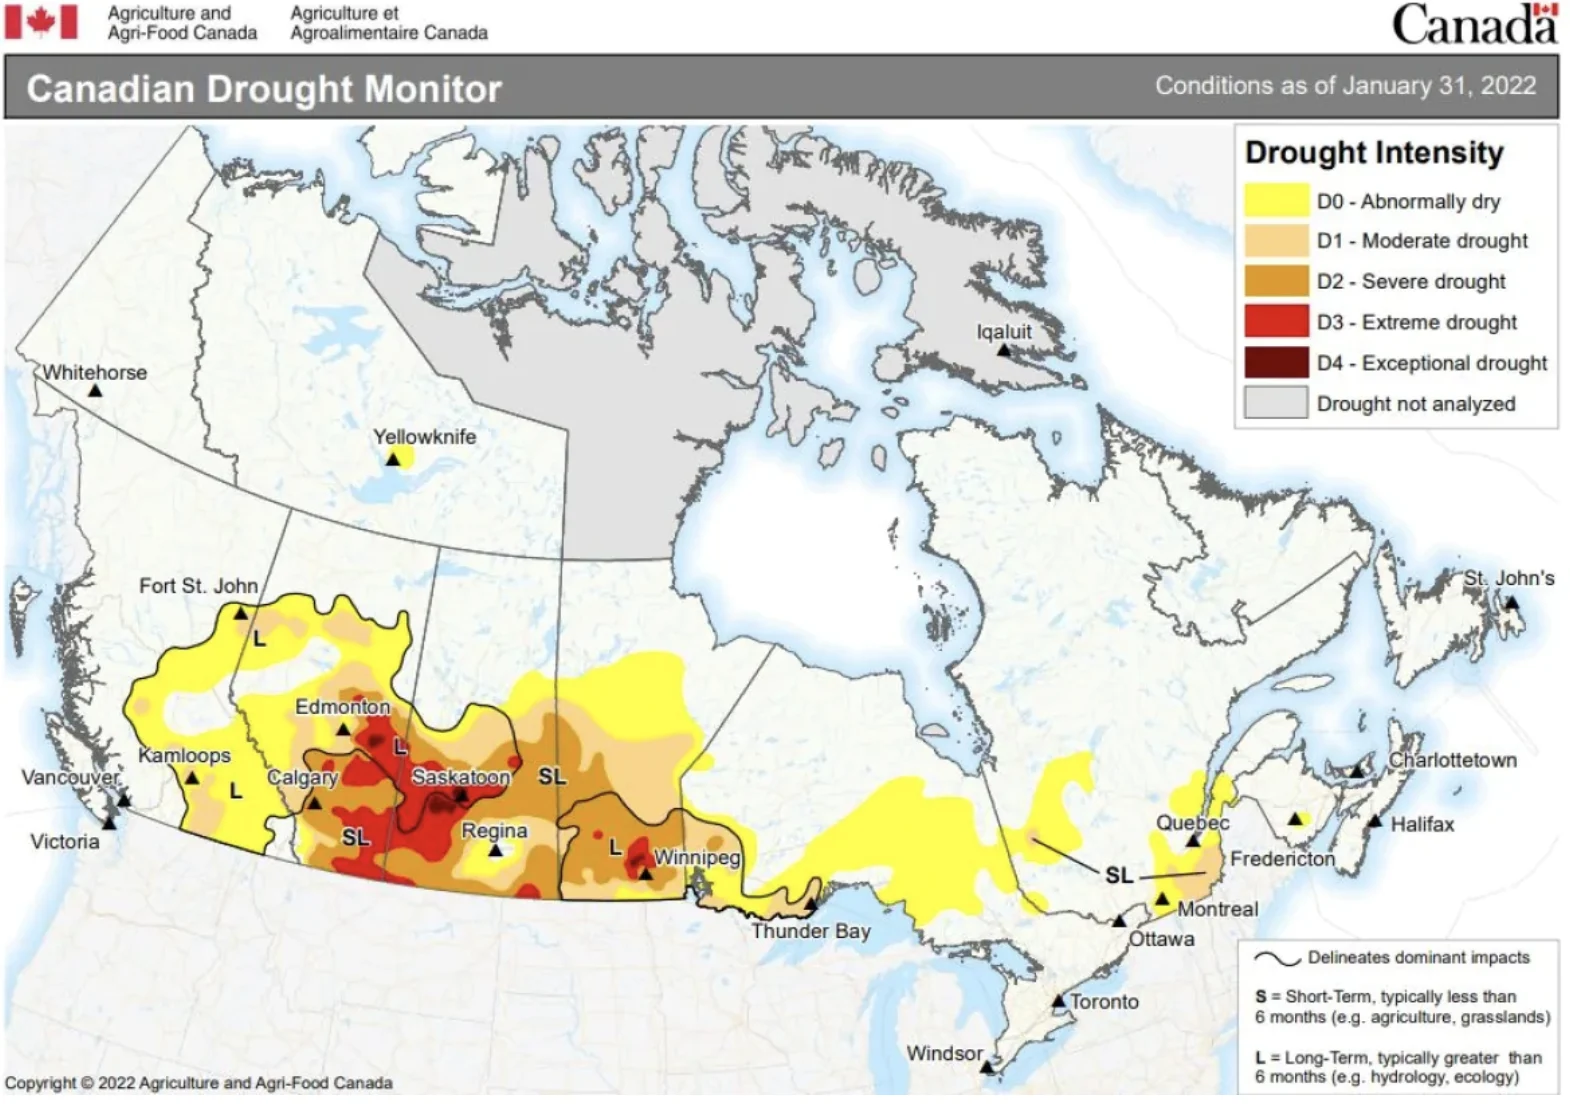 The latest drought monitor report from Agriculture and Agri-Food Canada shows the extent and severity of drought conditions across the country as of Jan. 31. Extreme drought regions still exist in central Saskatchewan and parts of Manitoba, but the coverage area has significantly reduced. (Agriculture and Agri-Food Canada)